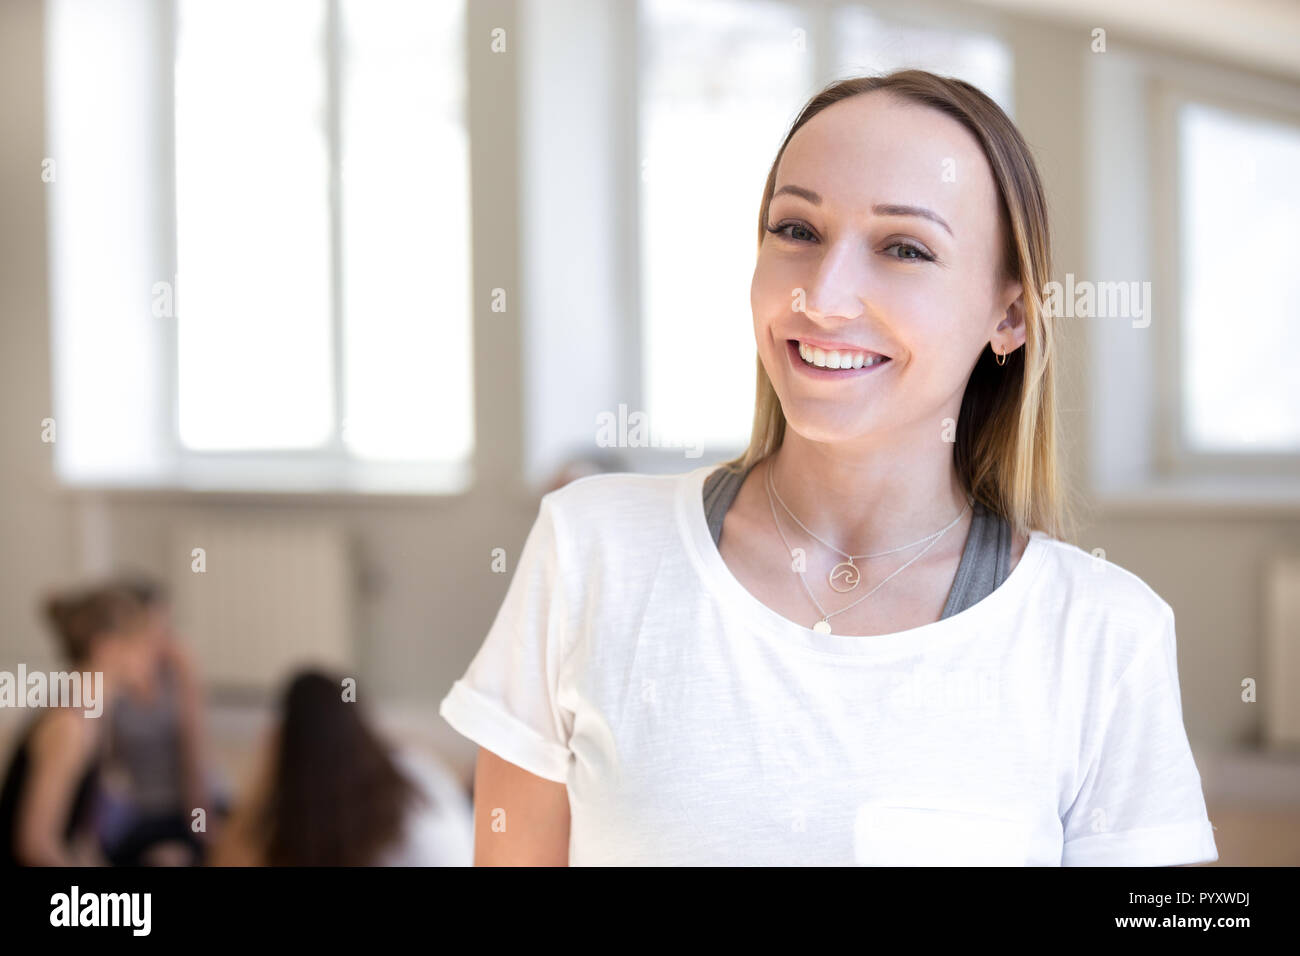 Fitness instructor female smiling looking at camera at workout s Stock Photo